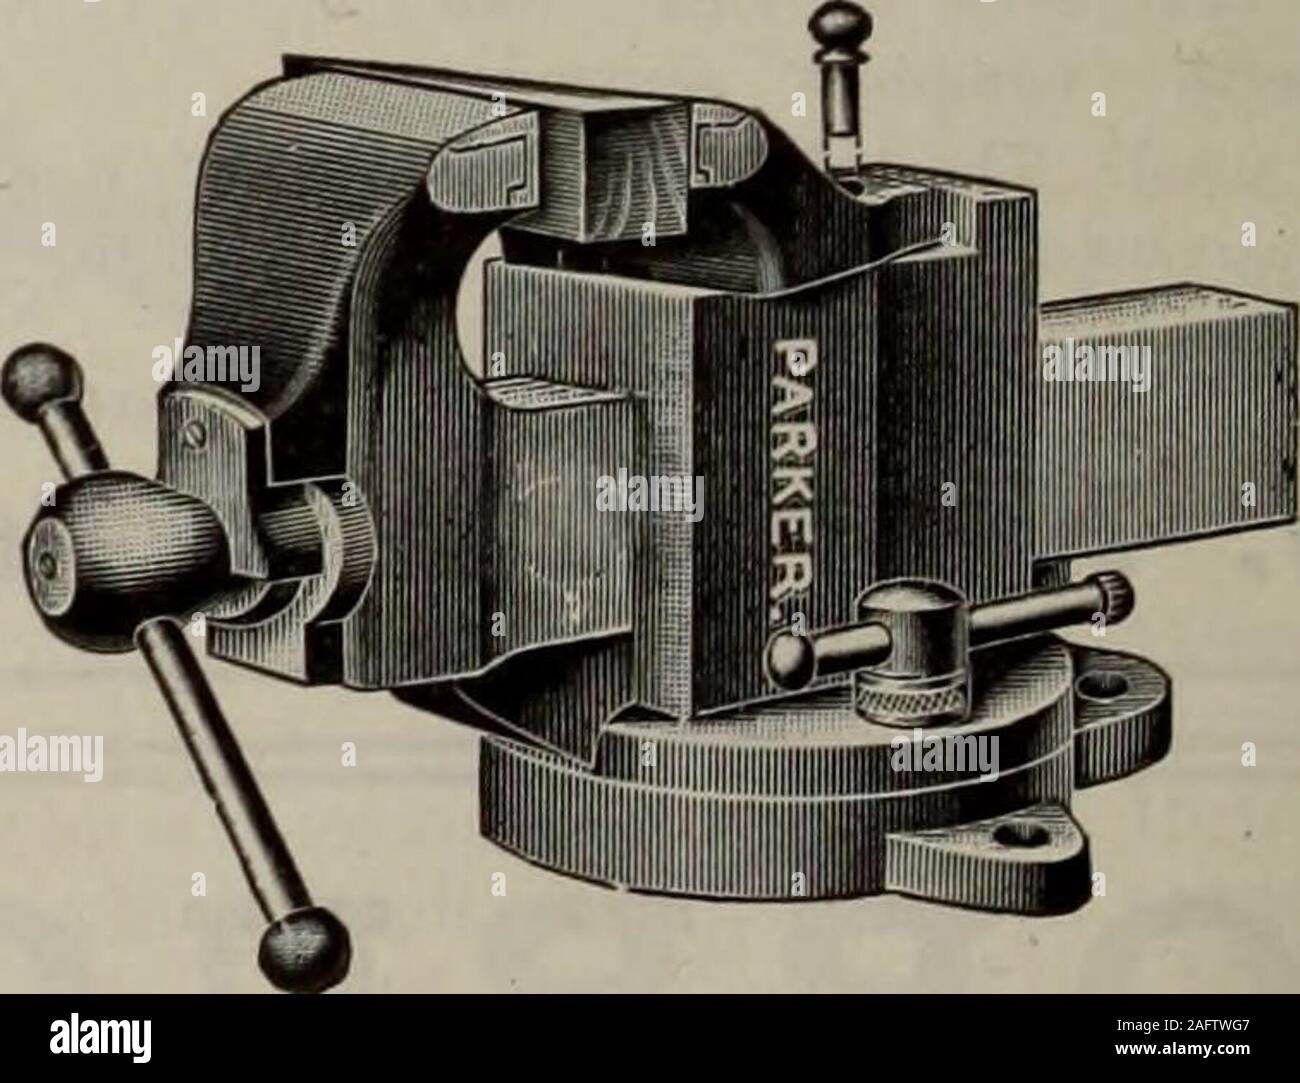 Hardware merchandising August-October 1912. PARKERS Swivel VICTOR VISES.  Quick Working — Convenient Mechanics should use this vise because it  savestime and money. With it any piece of work can be instantlygrasped